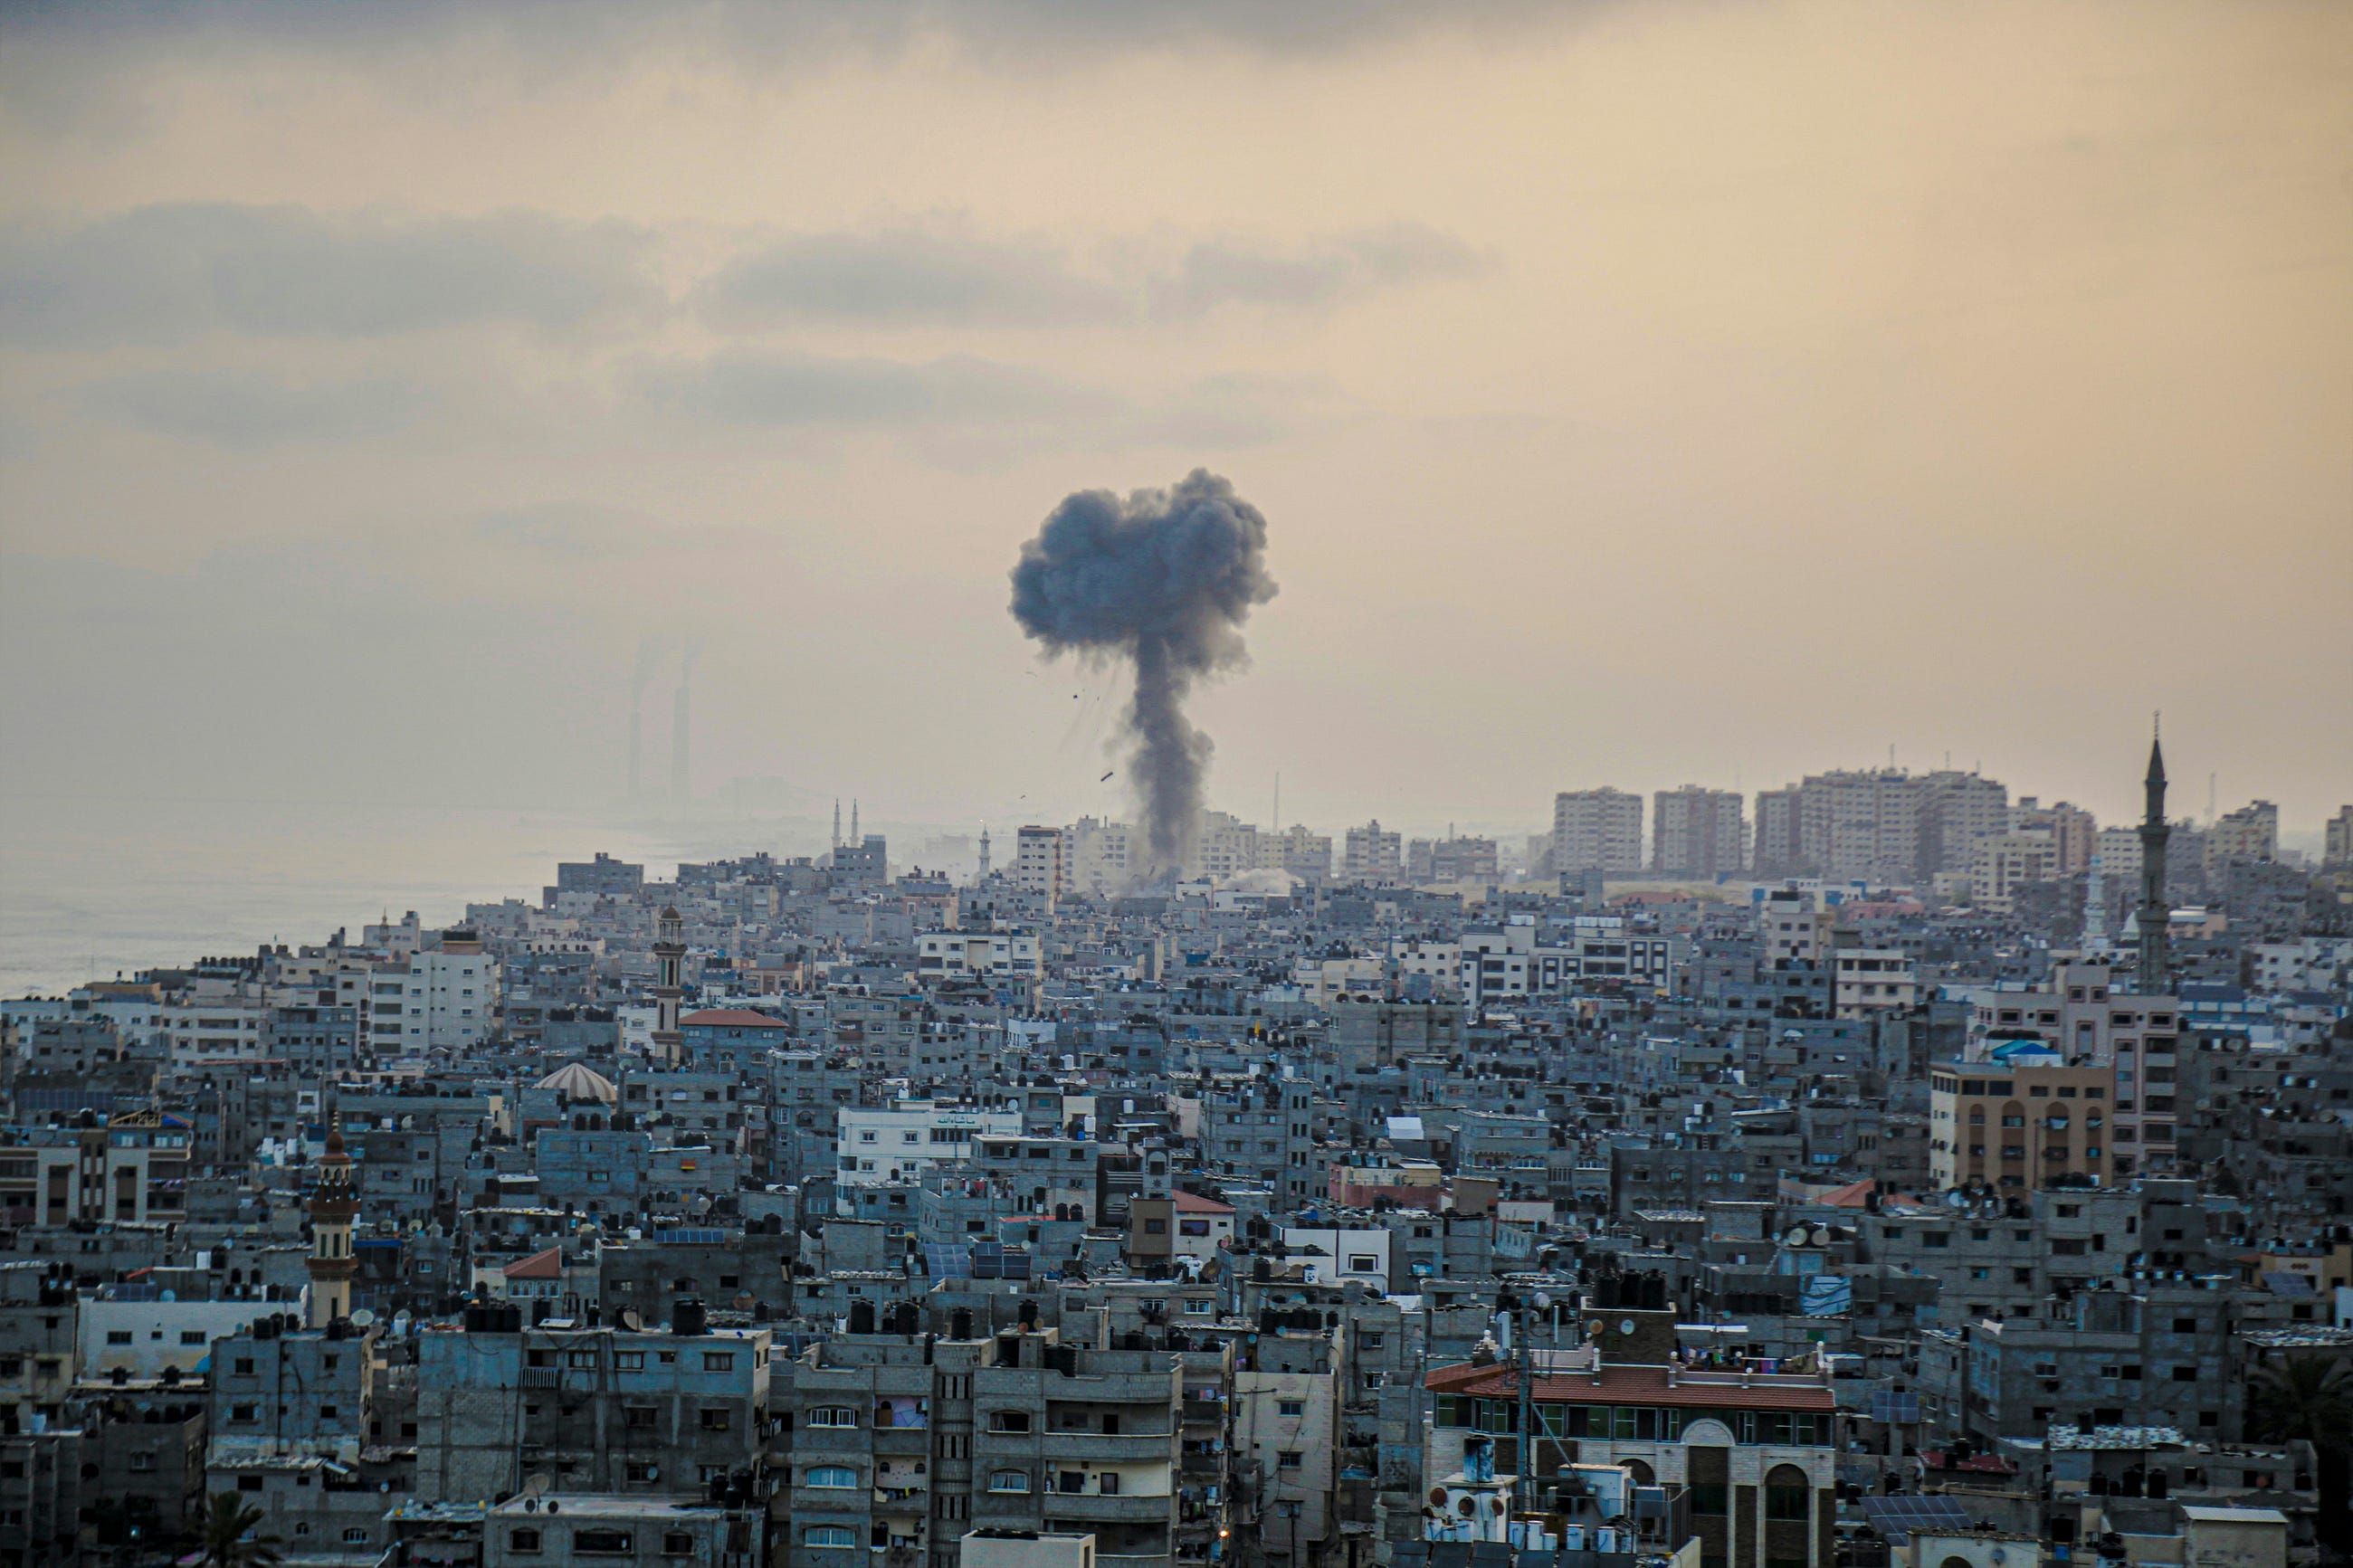 Report: Most Explosives used by Hamas Are Unexploded Israeli Bombs Dropped on Palestine